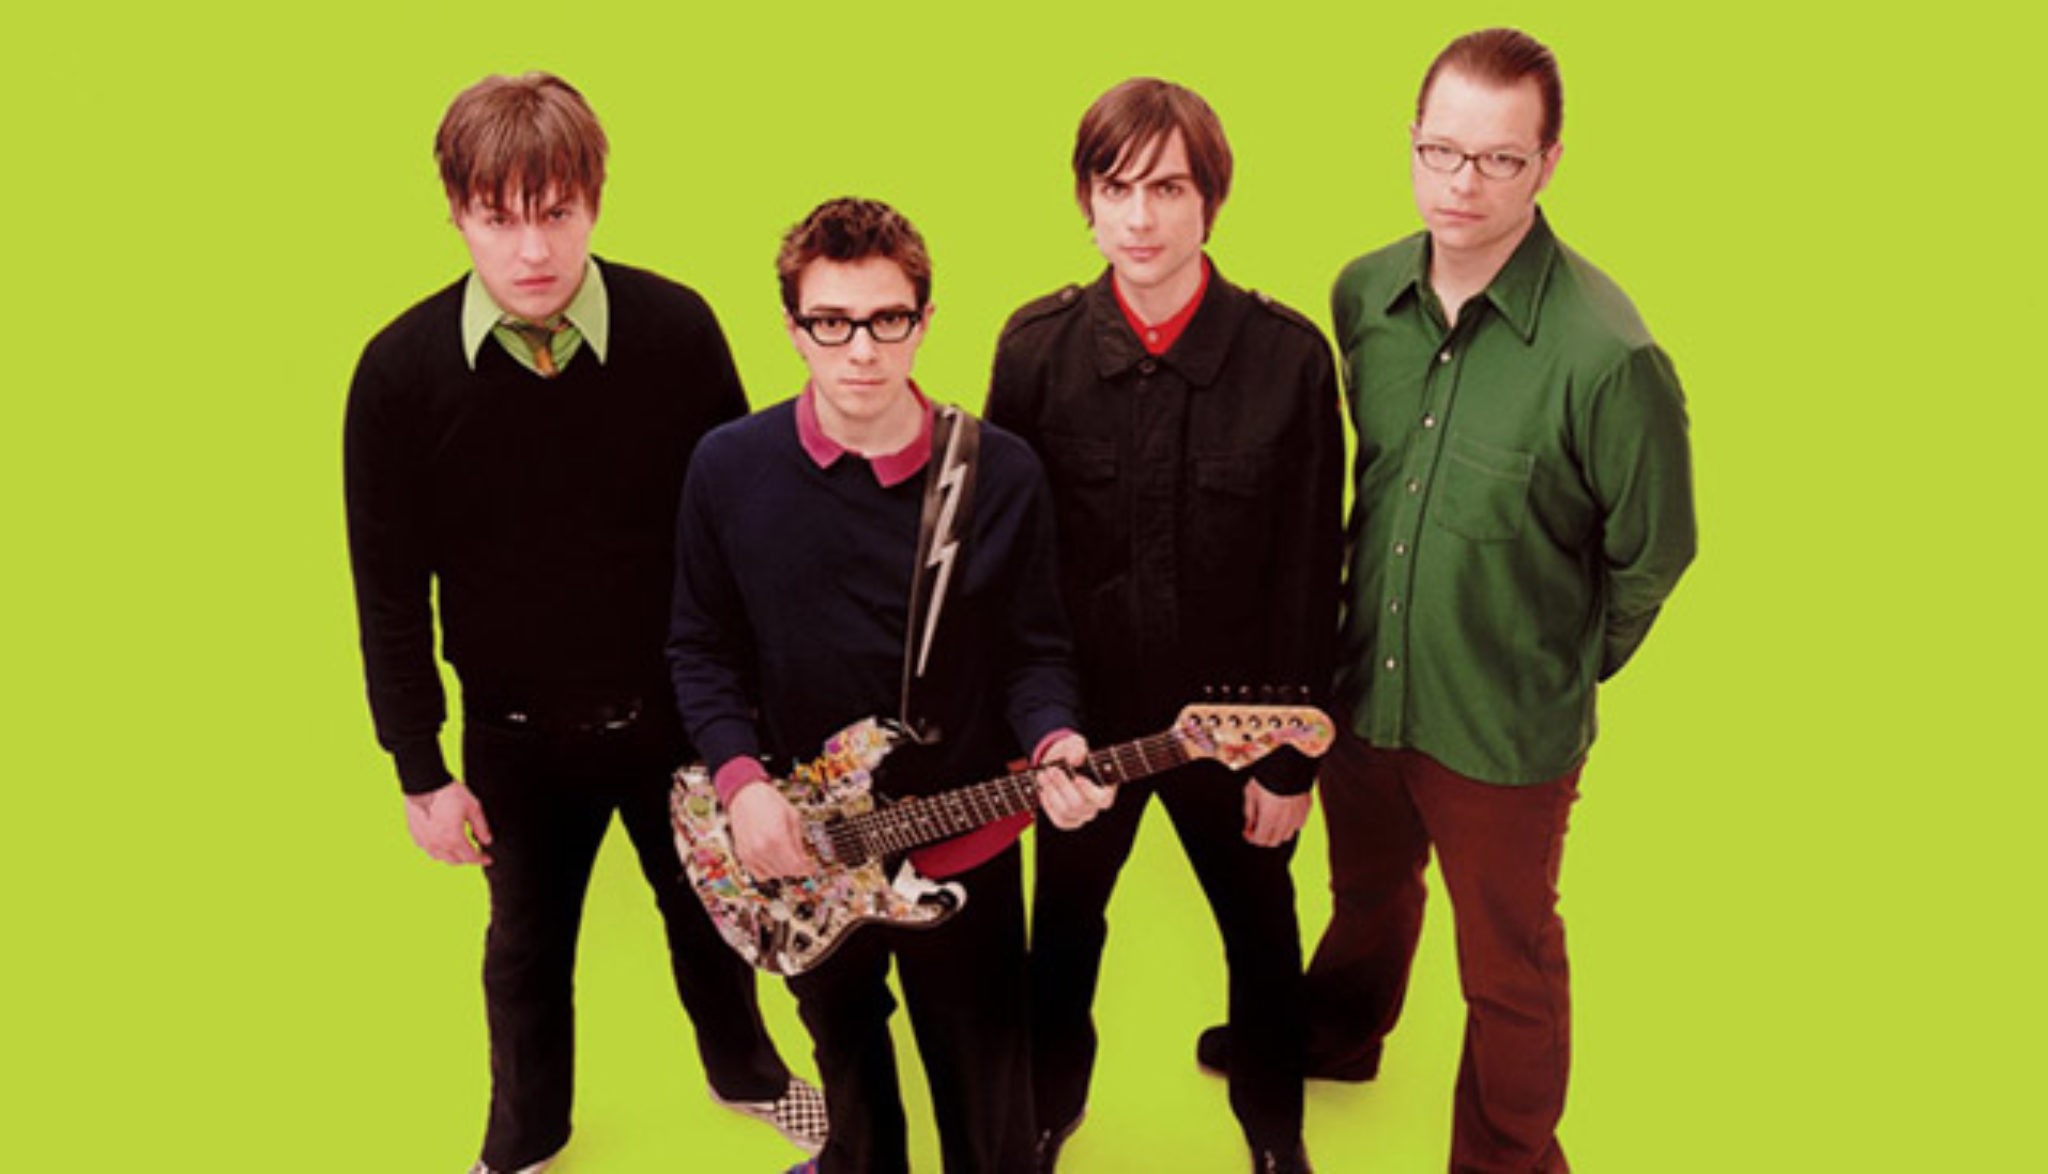 The Green Album Weezer Review Image 2048x1174 